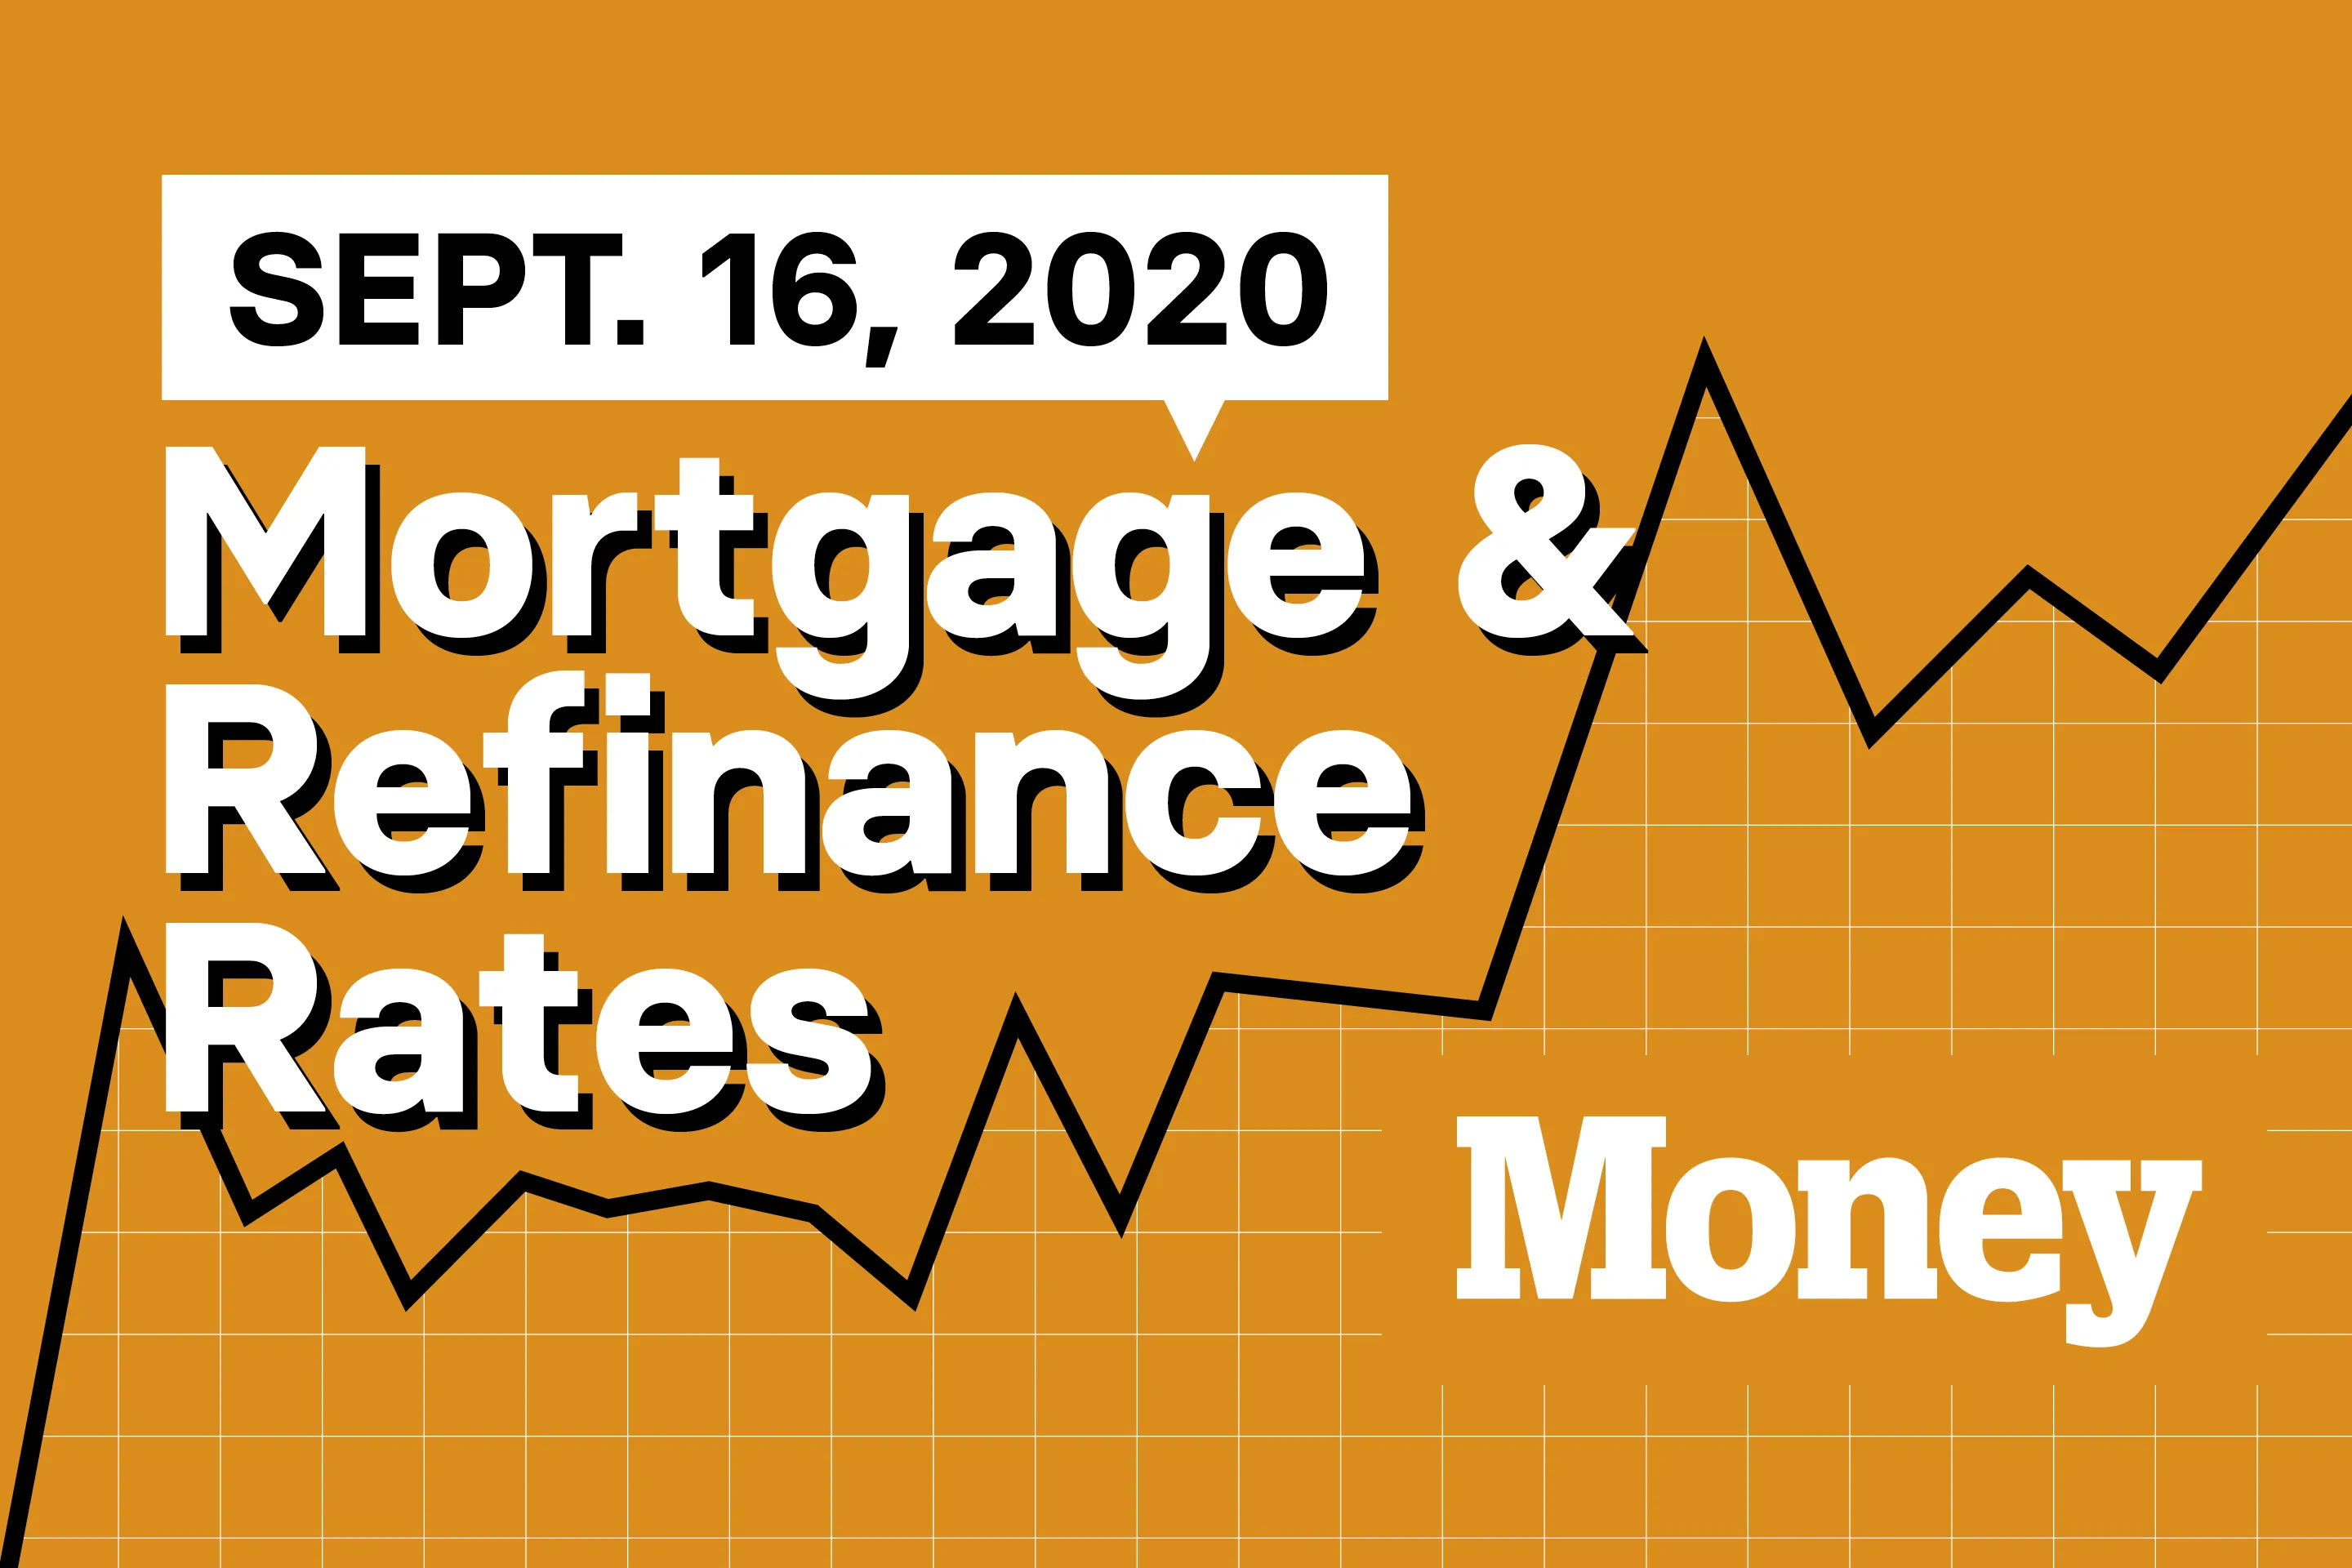 Here Are Today's Best Mortgage & Refinance Rates for September 16, 2020